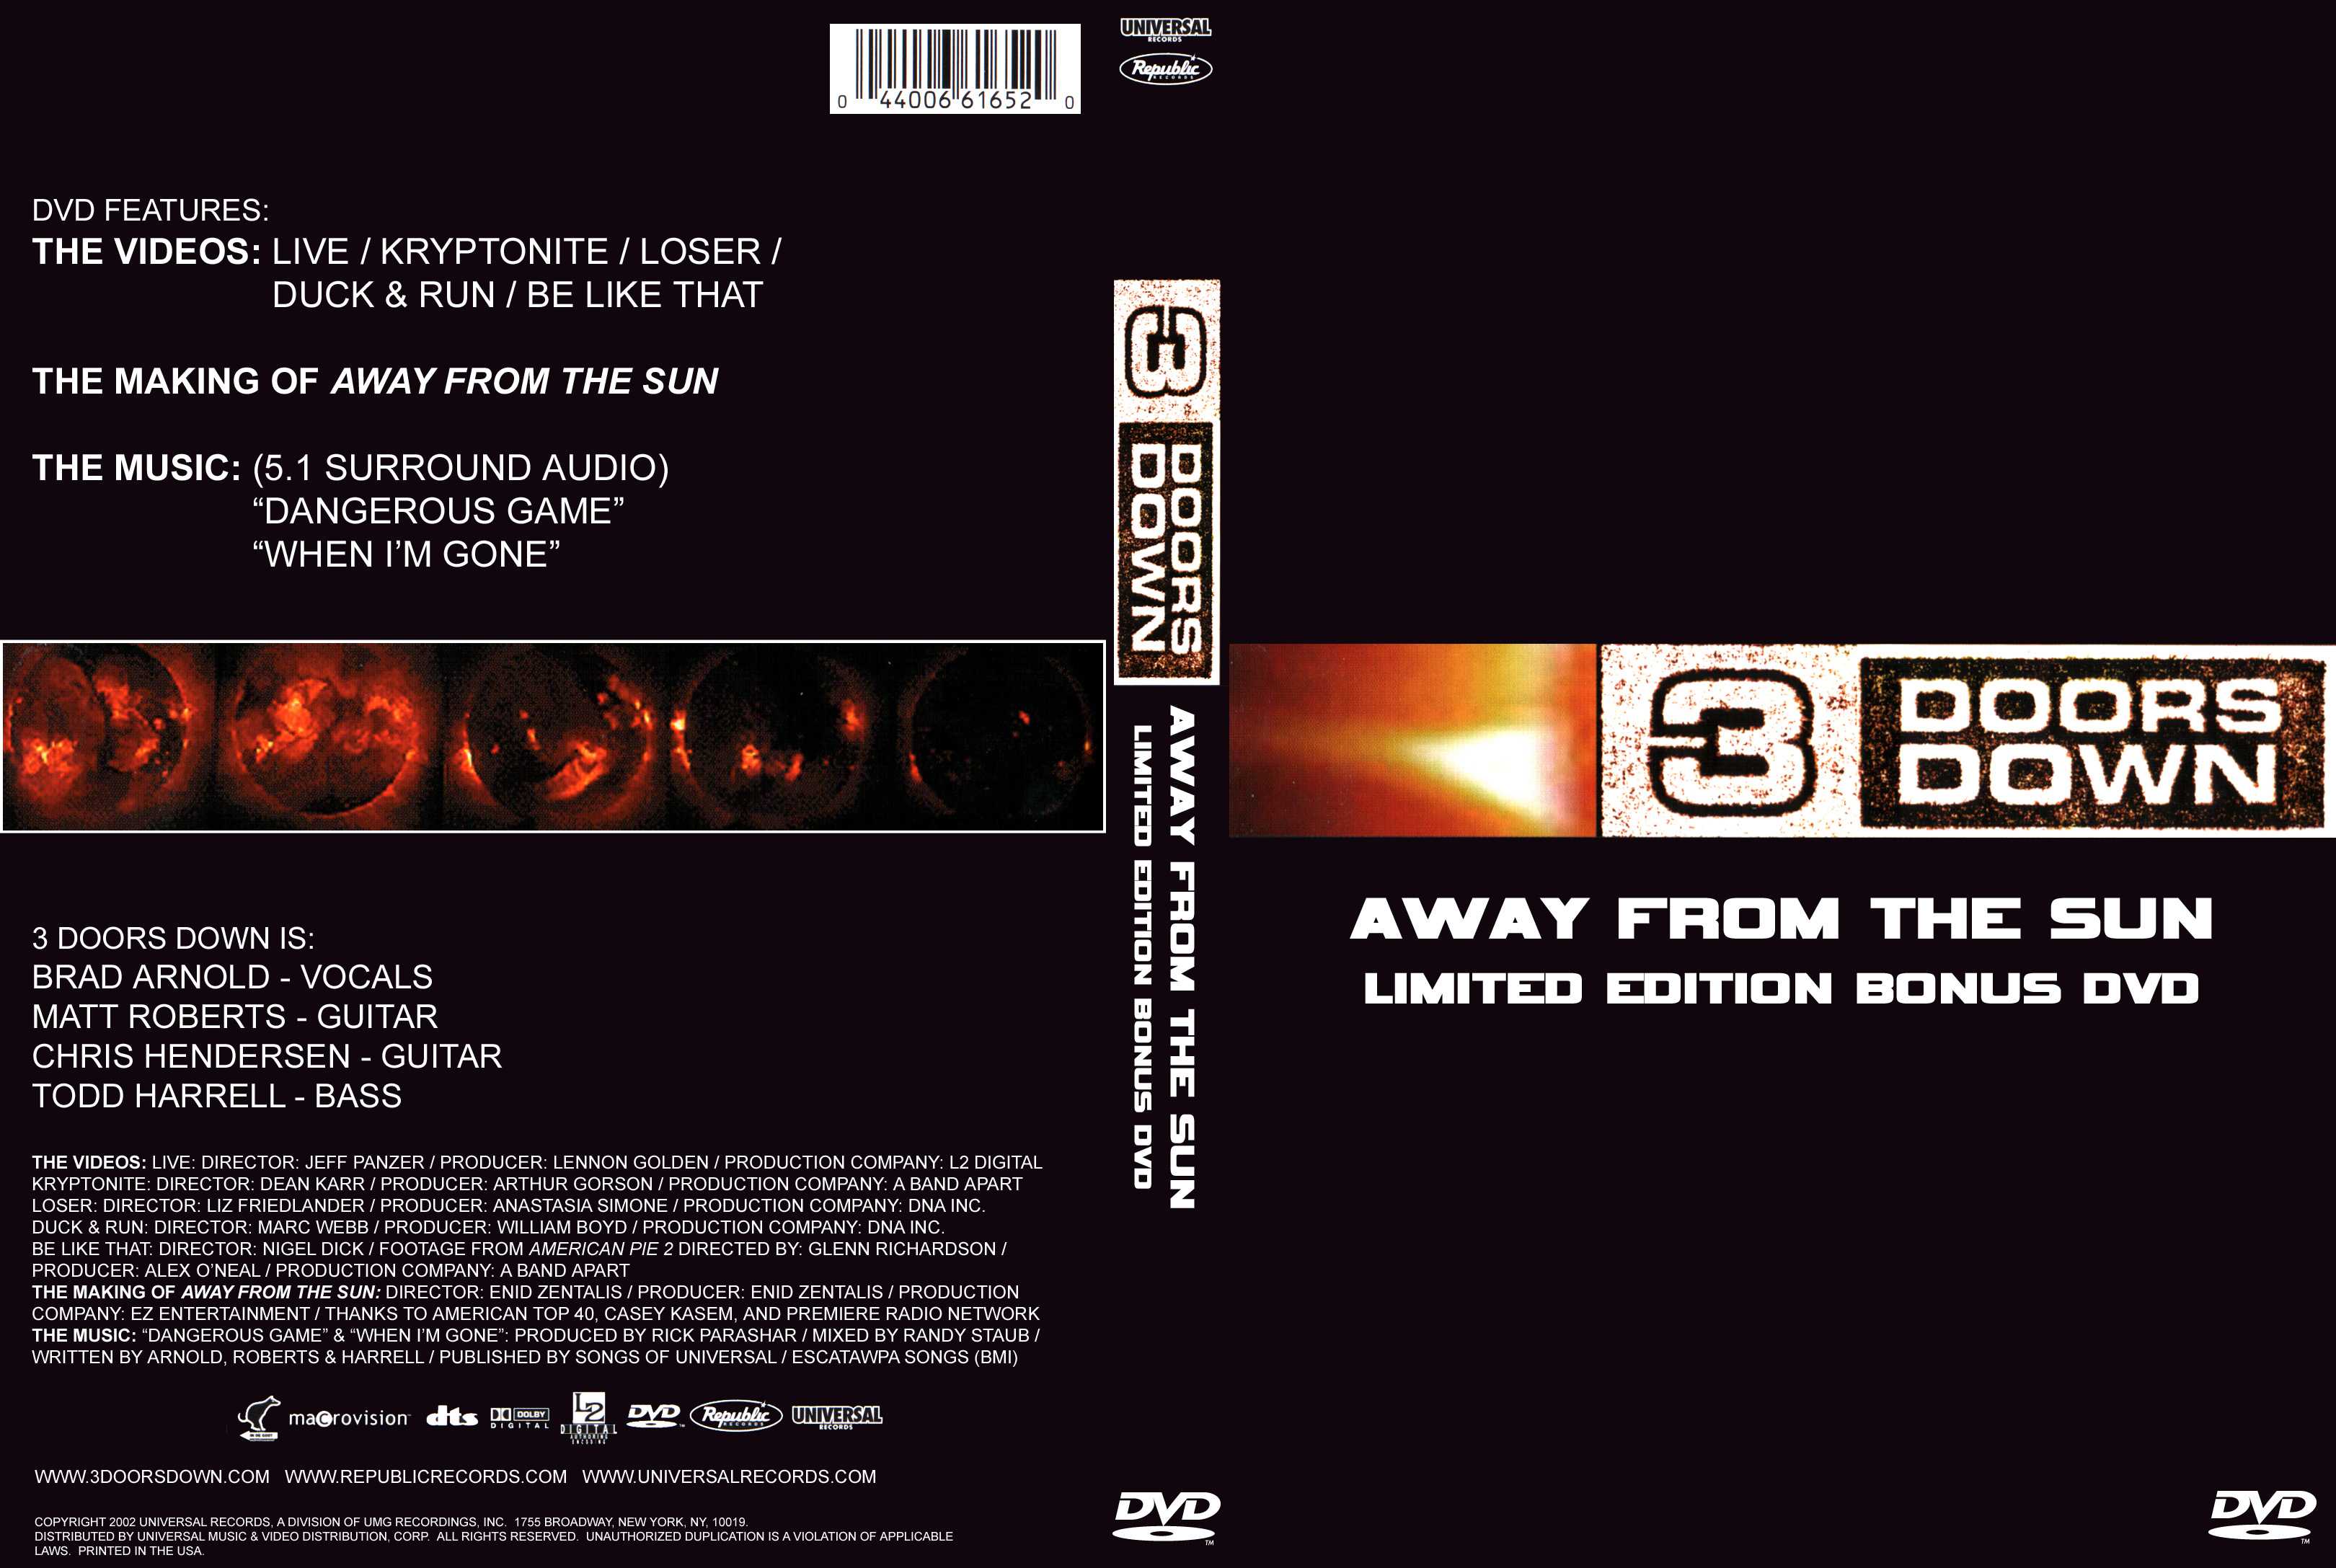 Jaquette DVD 3 doors down - away from the sun